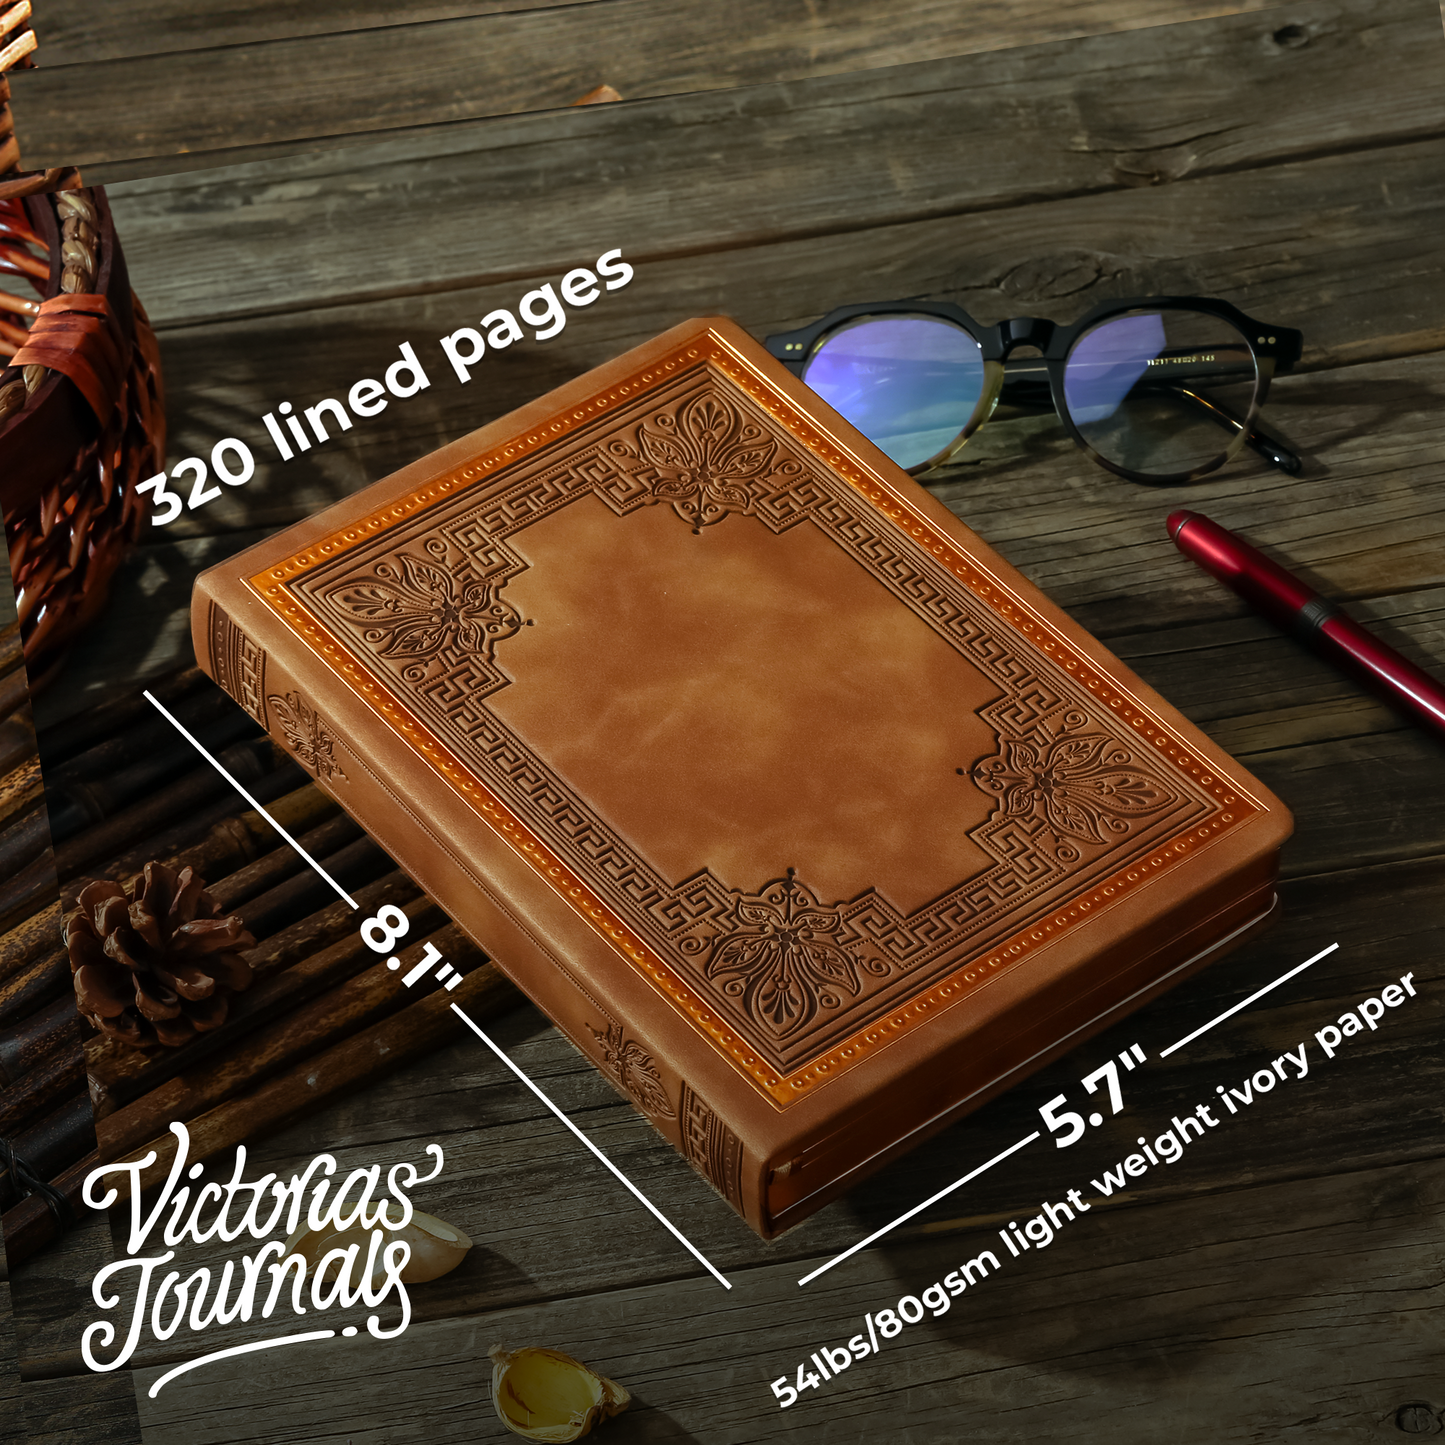 Victoria's Journals Vintage Style Diary – Writing, Note Taking, Poetry, Travel, 320p. (Sienna Brown)